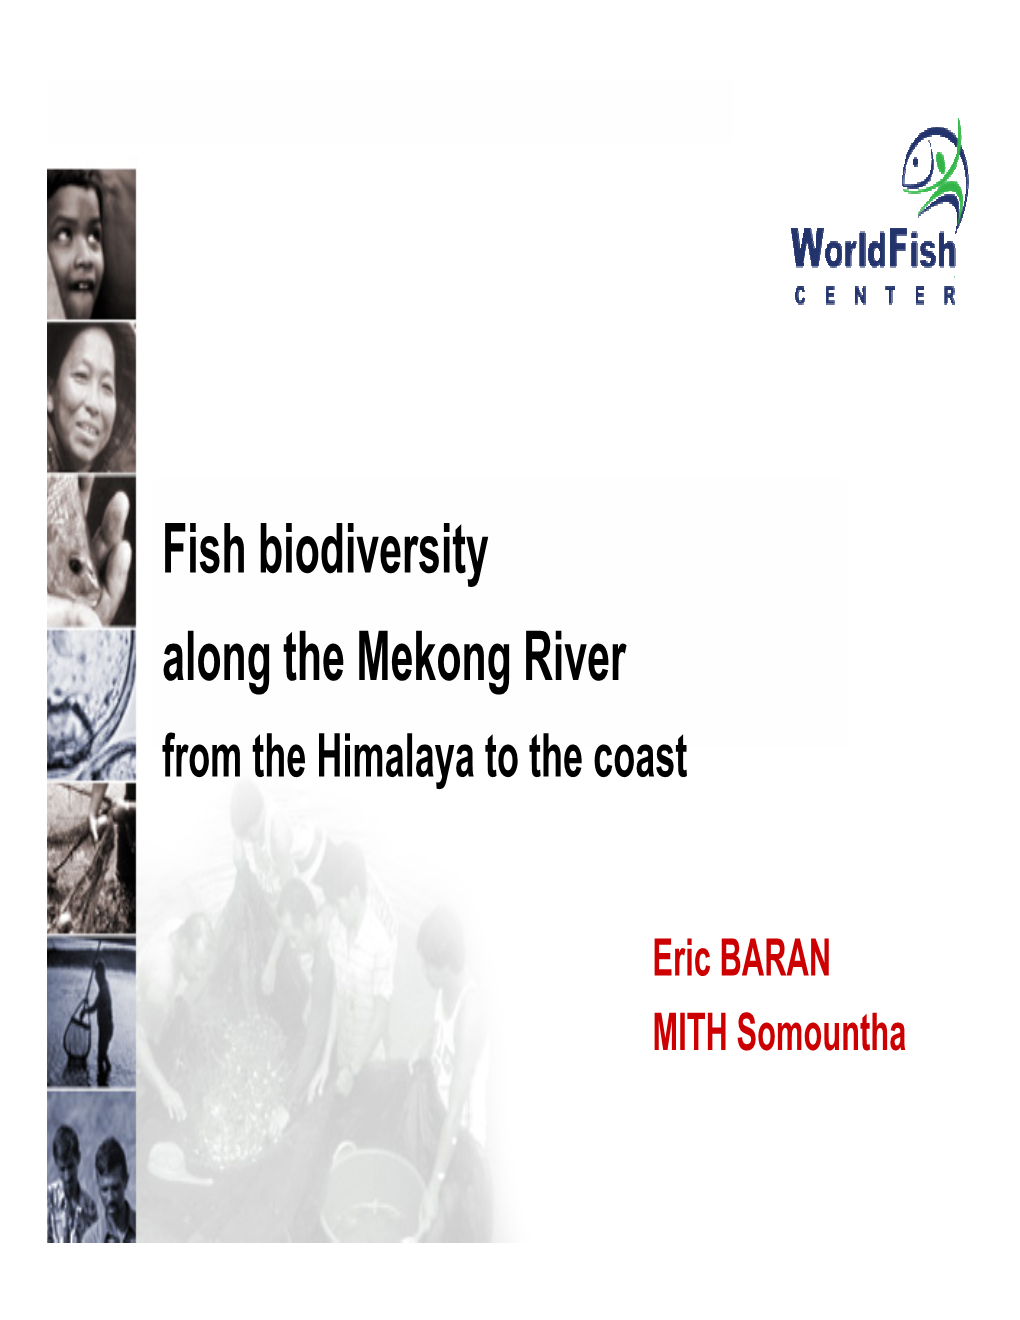 Fish Biodiversity Along the Mekong River from the Himalaya to the Coast